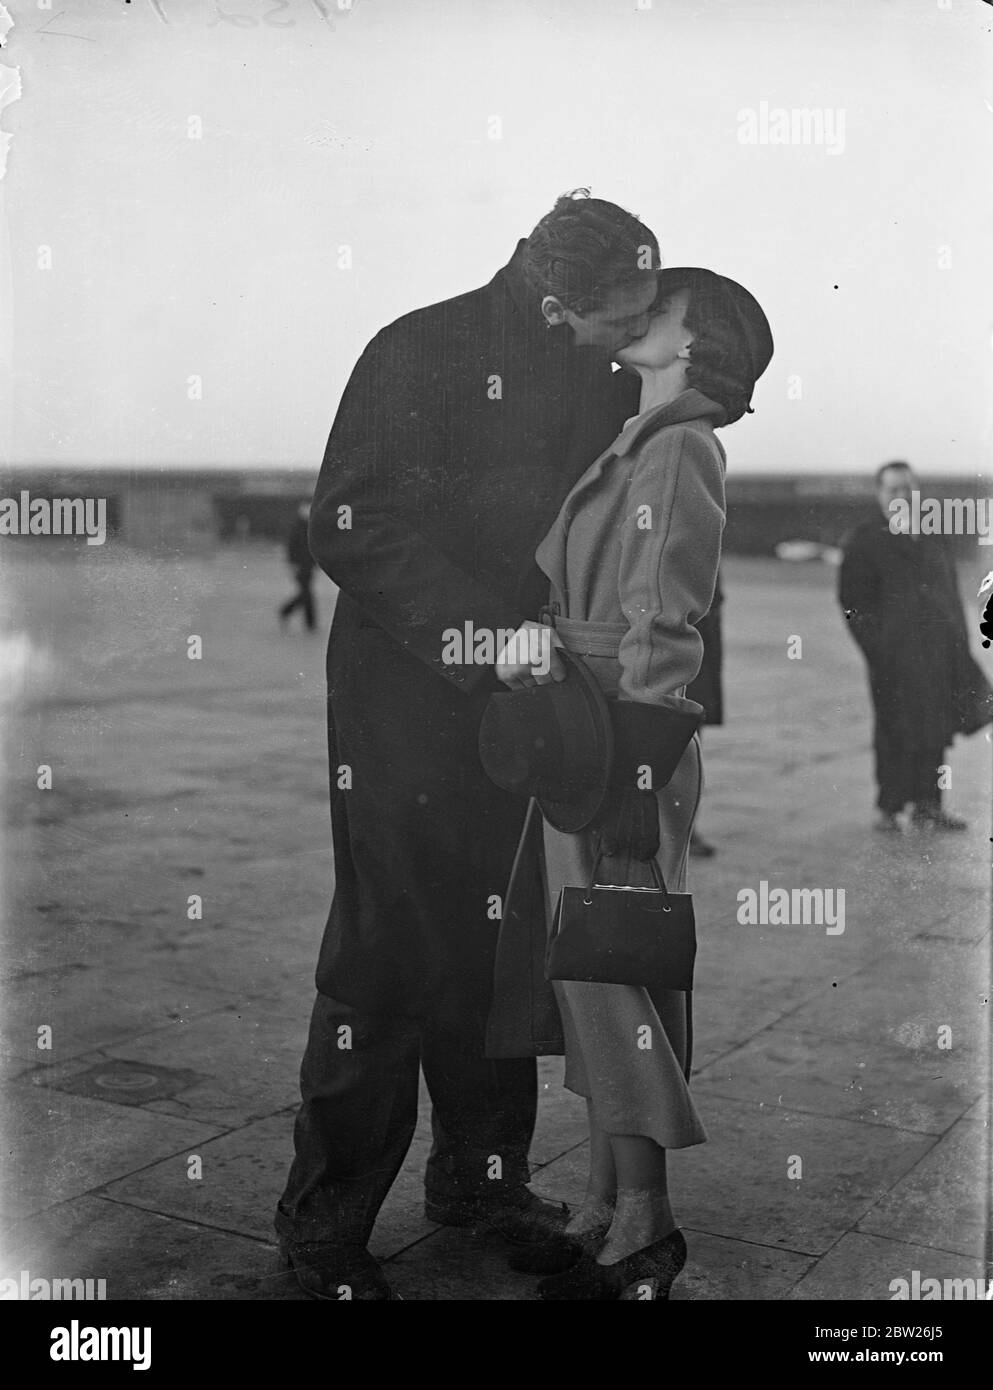 Ben Foord arrives home by air from Hamburg, welcomed by his wife. Ben Foord, the former British Empire heavyweight champion, who stood 12 rounds against Max Schmeling in Hamburg, arrived at Croydon by air from Hamburg art are suddenly changing his plans. He was greeted by his wife, at the aerodrome.. 1 February 1938 Stock Photo